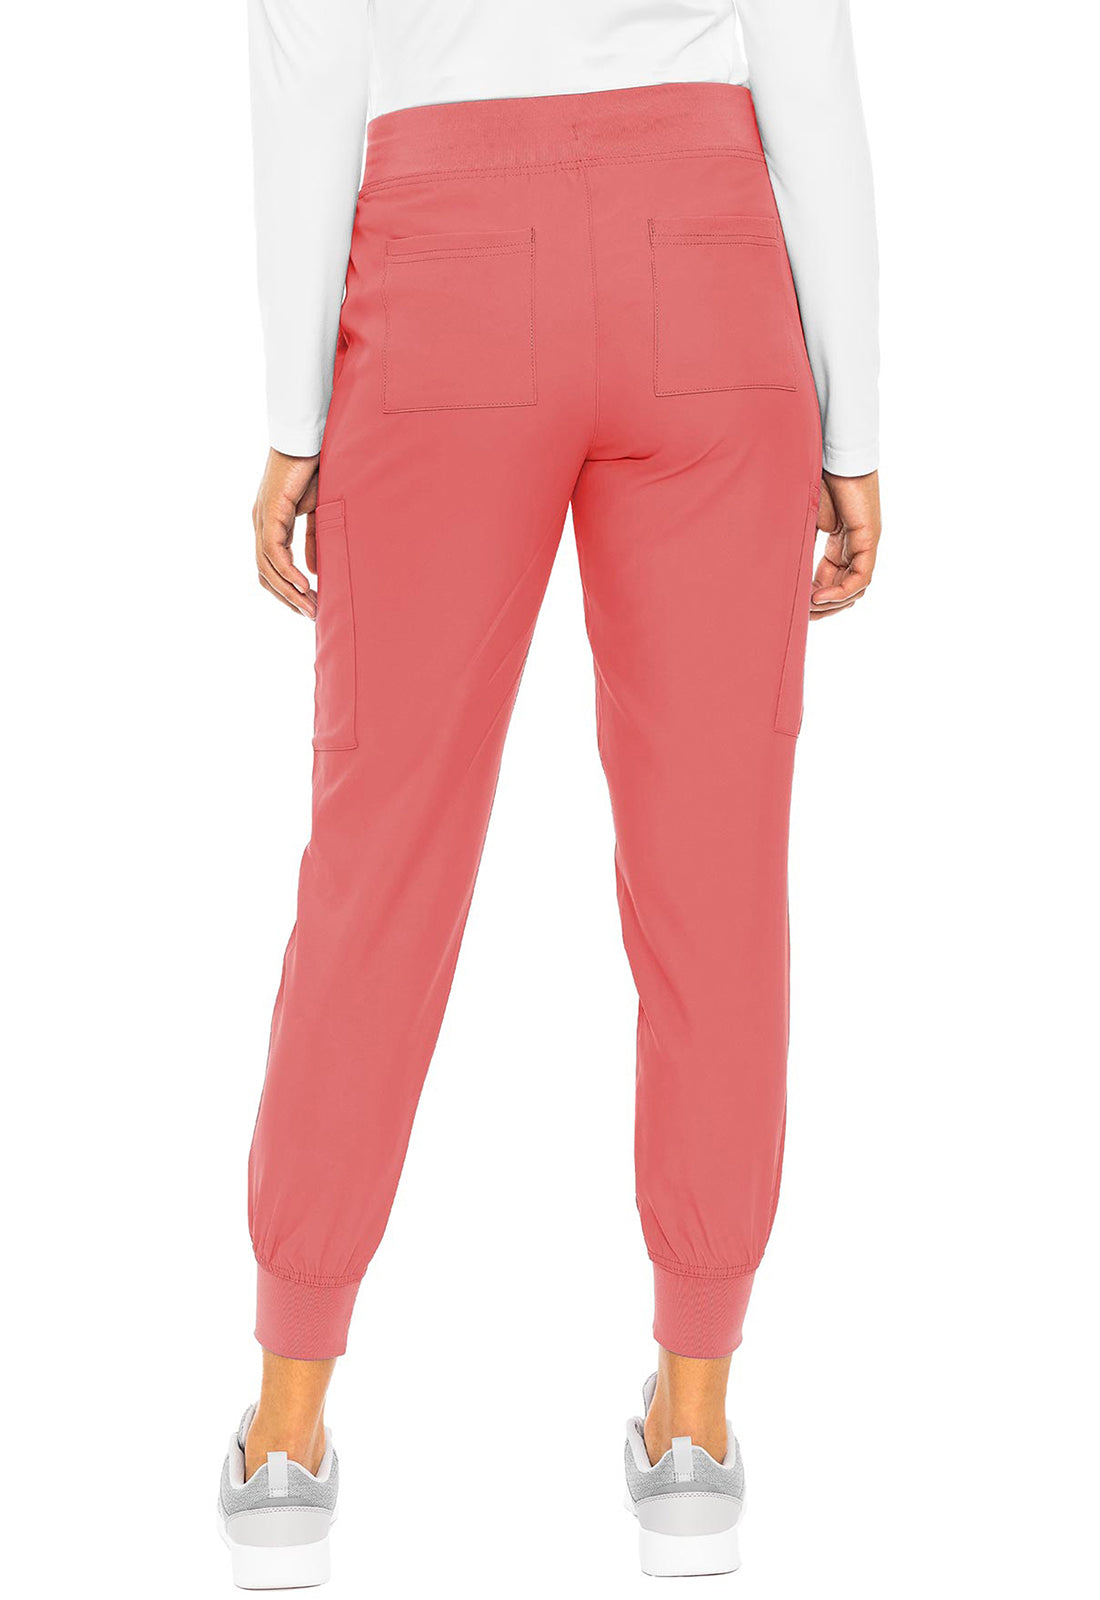 Med Couture Insight Women's Jogger Pant (Plus Size) - Just Scrubs